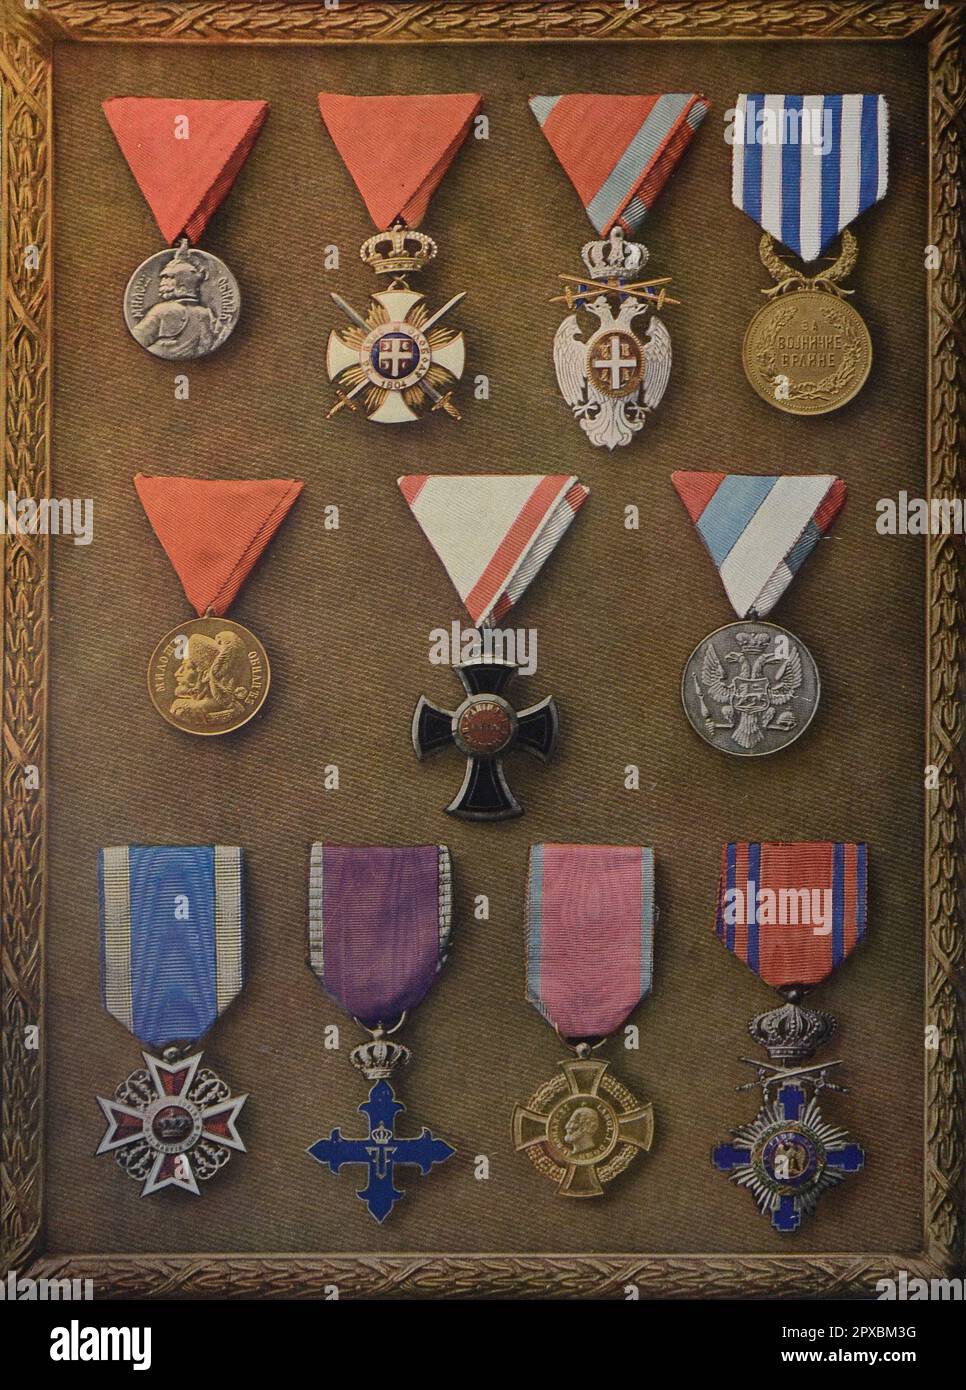 World War I. War decorations. Serbia - Montenegro - Romania From Left to right (at the top), Serbia: medal of bravery; Order of Karađorđe's Star; Order of the White Eagle; medal of military virtue. - (in the middle), Montenegro: Obilić Medal or Medal for Bravery 'Miloš Obilić'; Order of Prince Danilo I; medal for bravery. - (bottom), Romania: Order of the Crown of Romania; cross of Michael the brave; cross of military virtue; Order of the Star of Romania Stock Photo